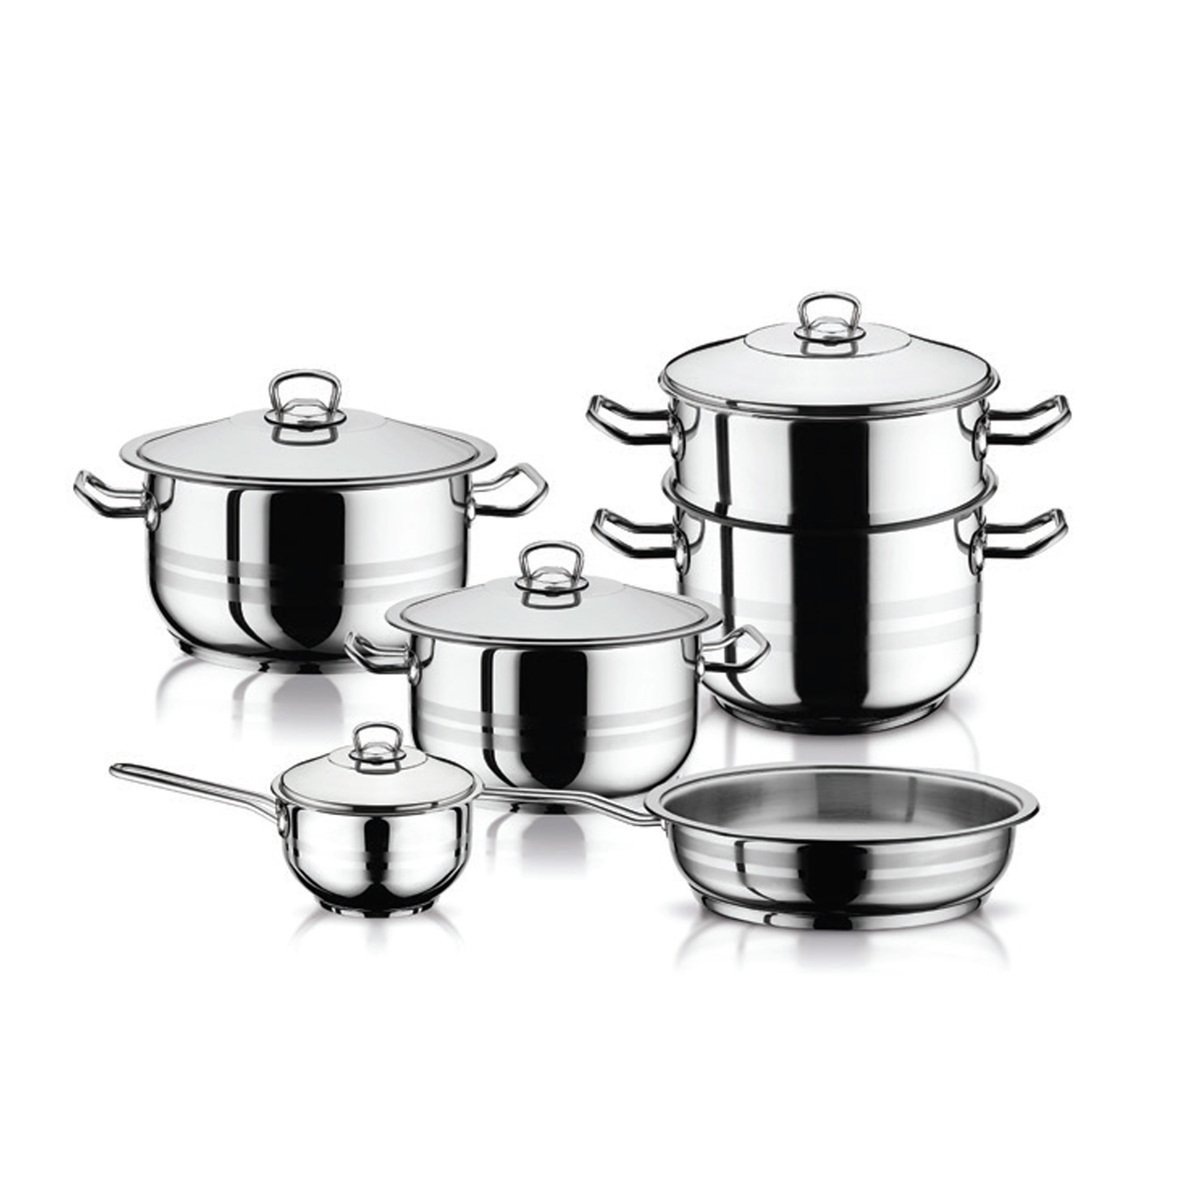 Hascevher Stainless Steel Cookware Set 10pcs Gastro